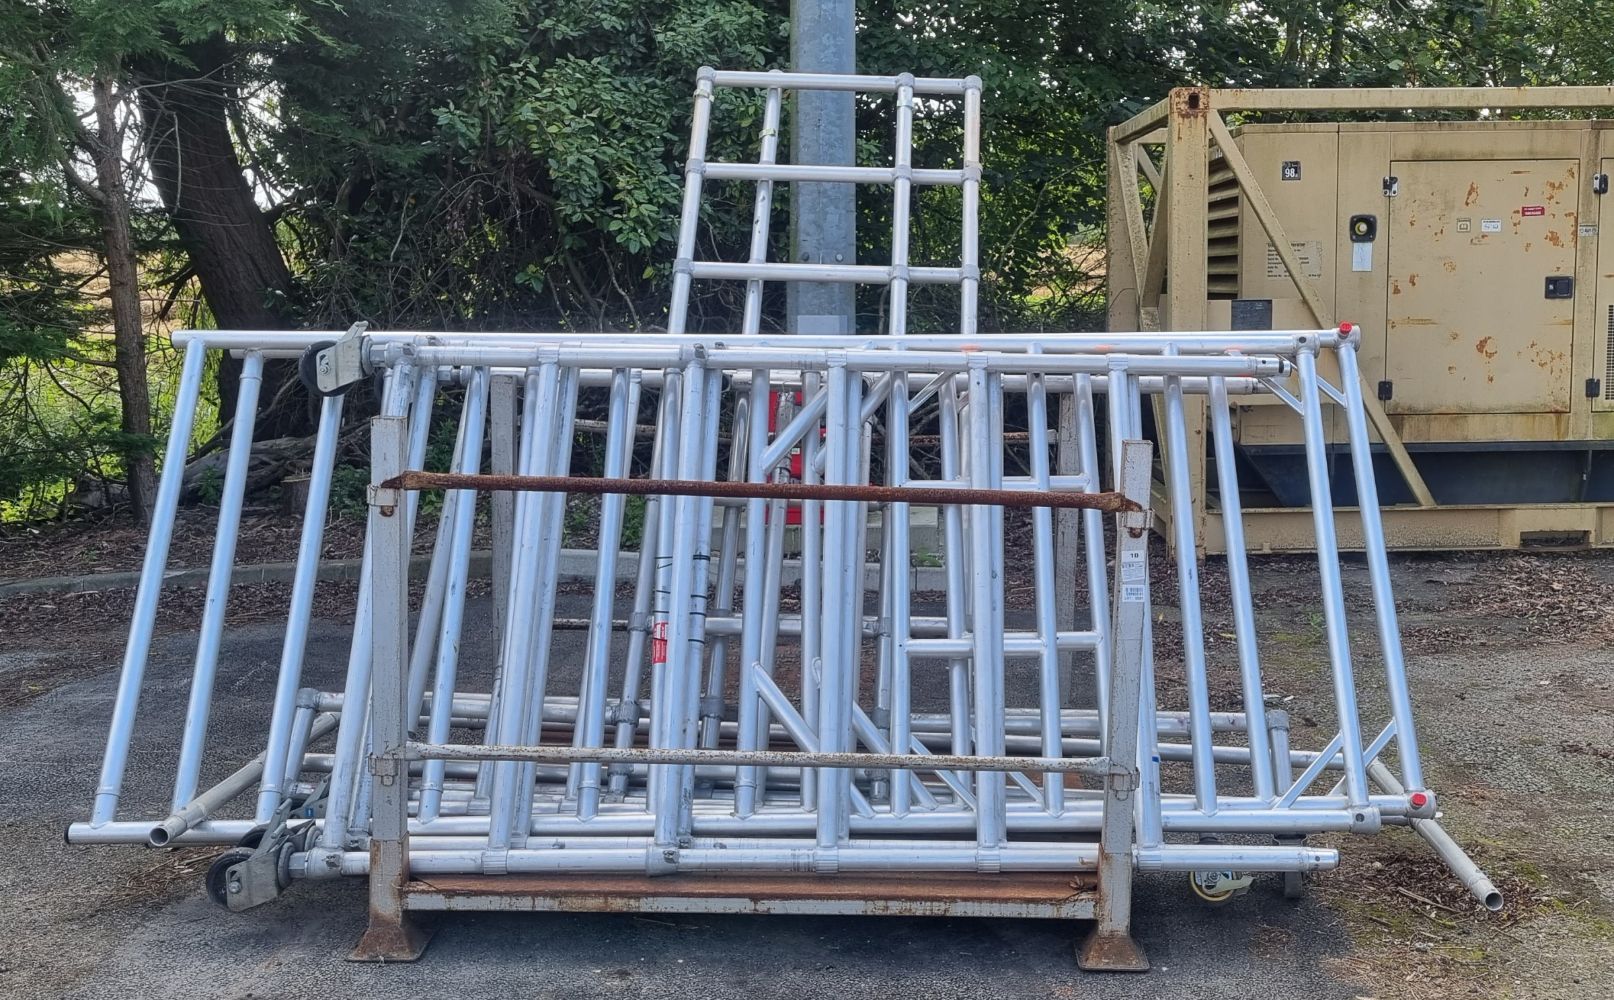 Online auction of aluminium scaffolding parts to include frames, braces, ladders and more - various sizes and quantities available - no reserve!